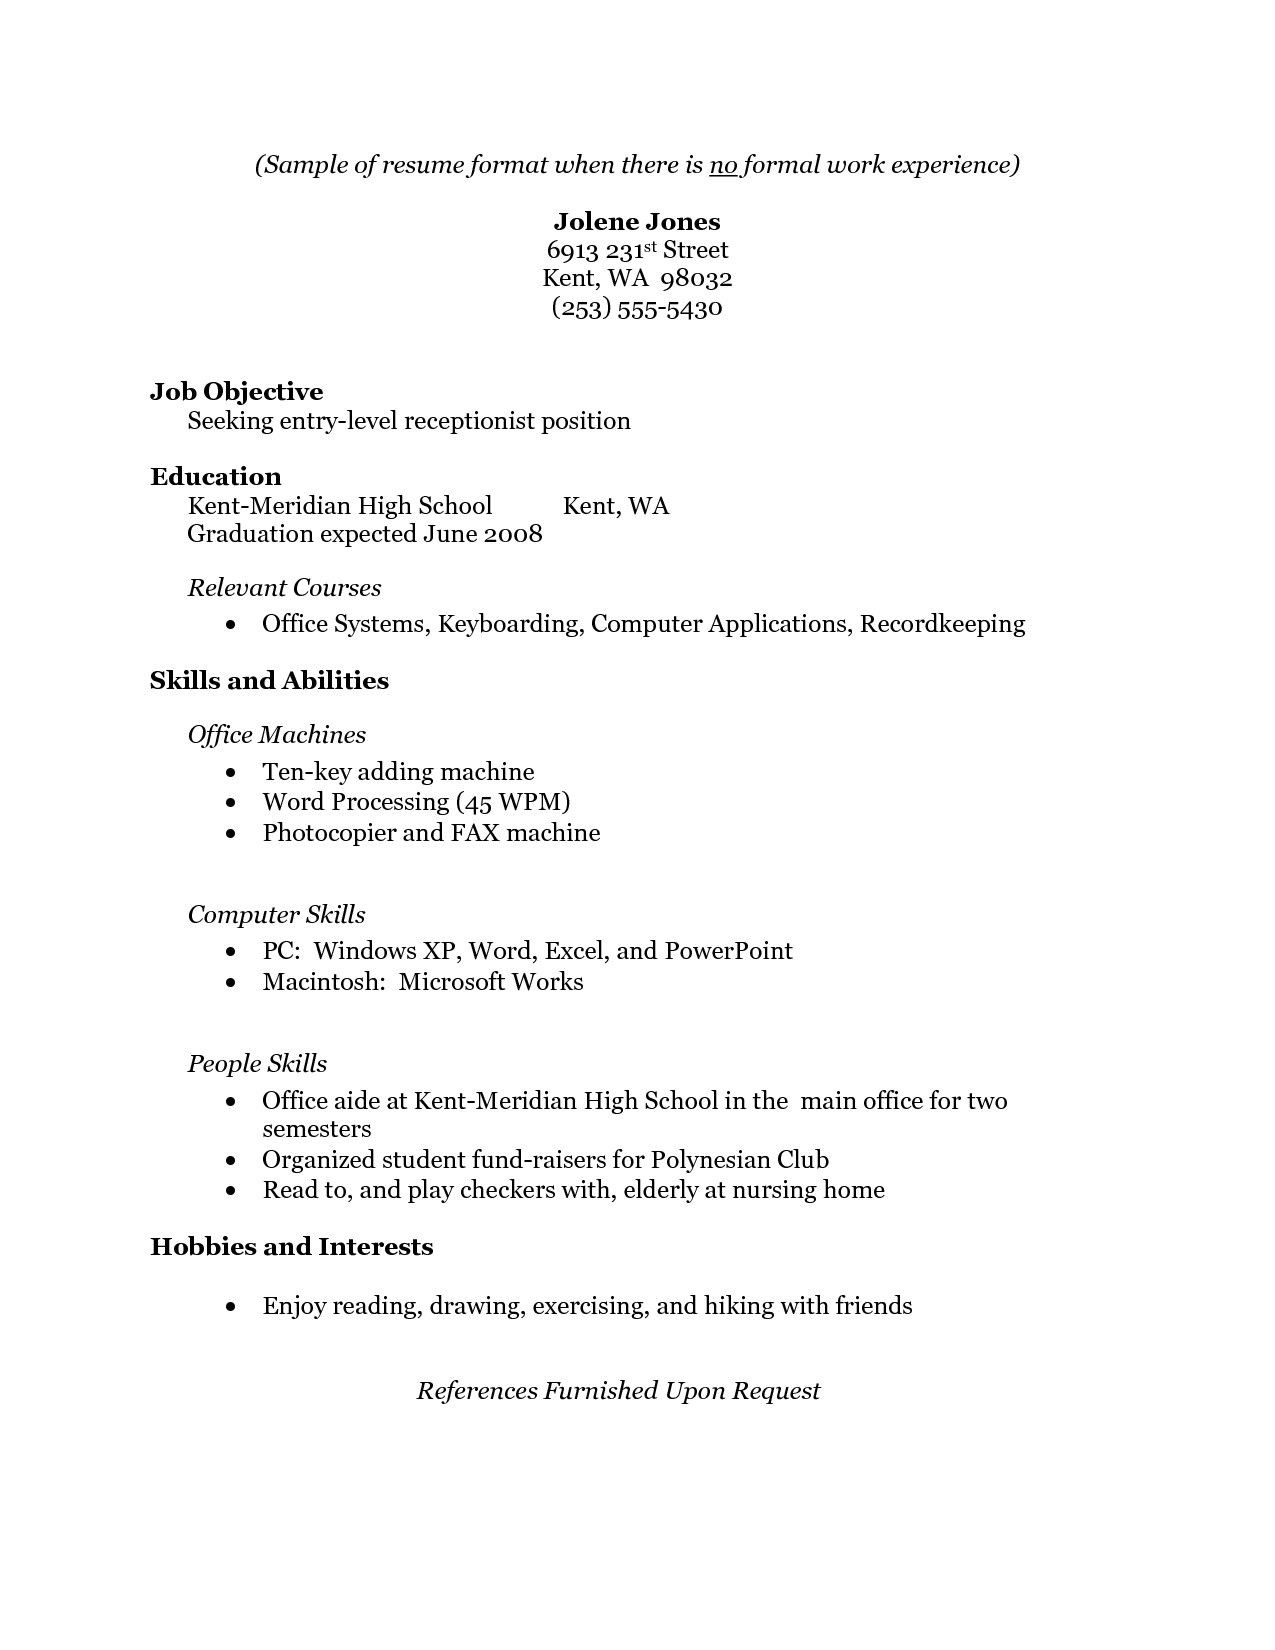 Resume Sample for High School Graduate with No Work Experience Free Resume Templates No Work Experience #experience …